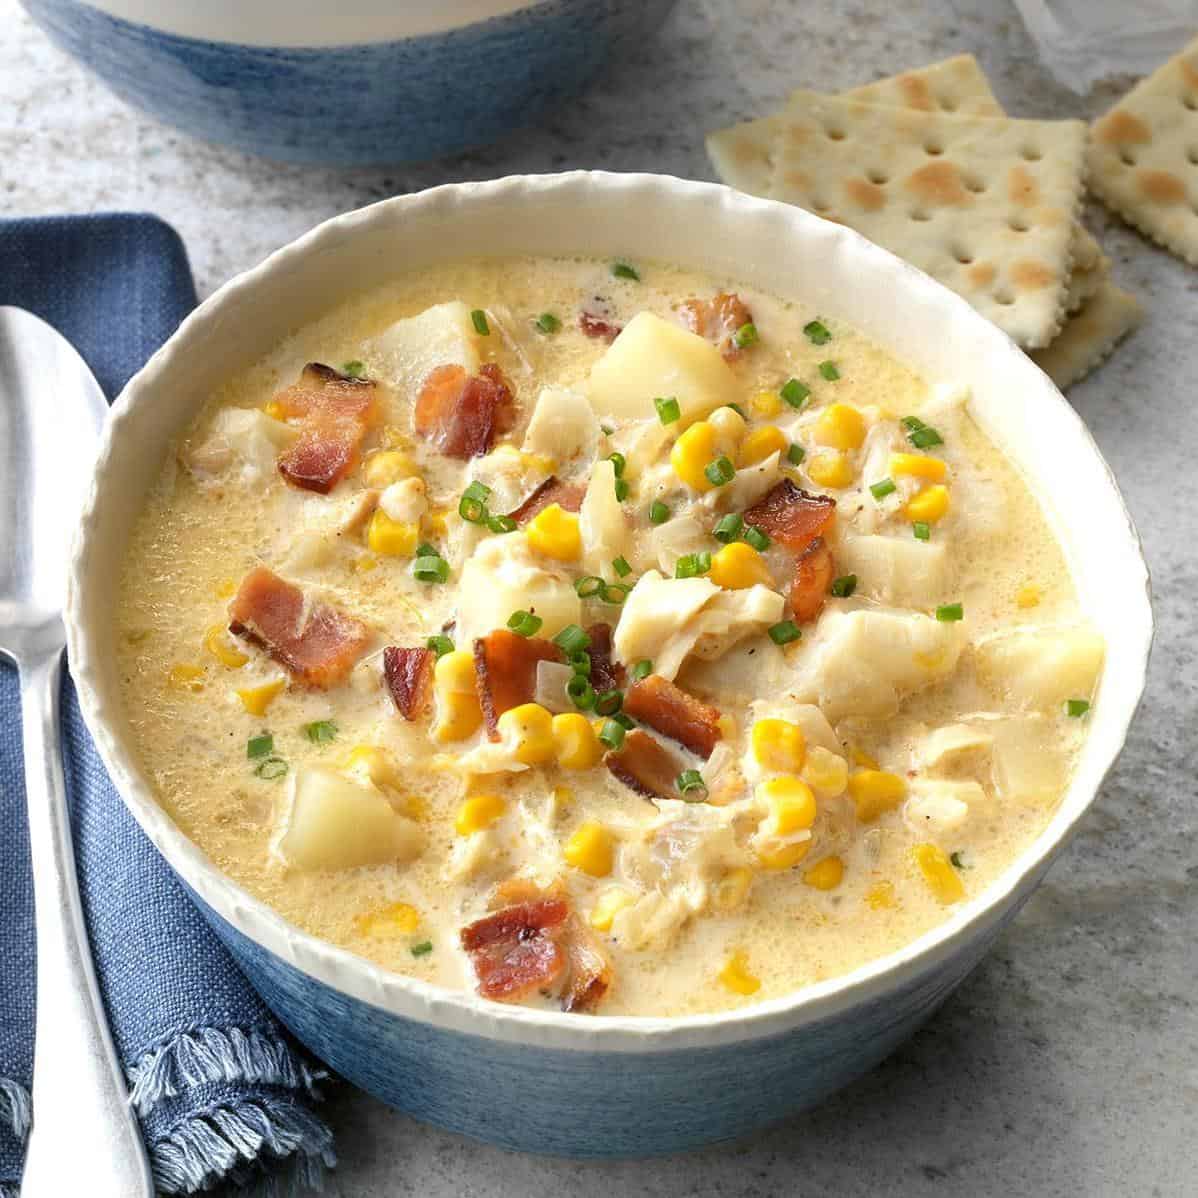  The ultimate comfort food: piping hot fish chowder served with crusty bread